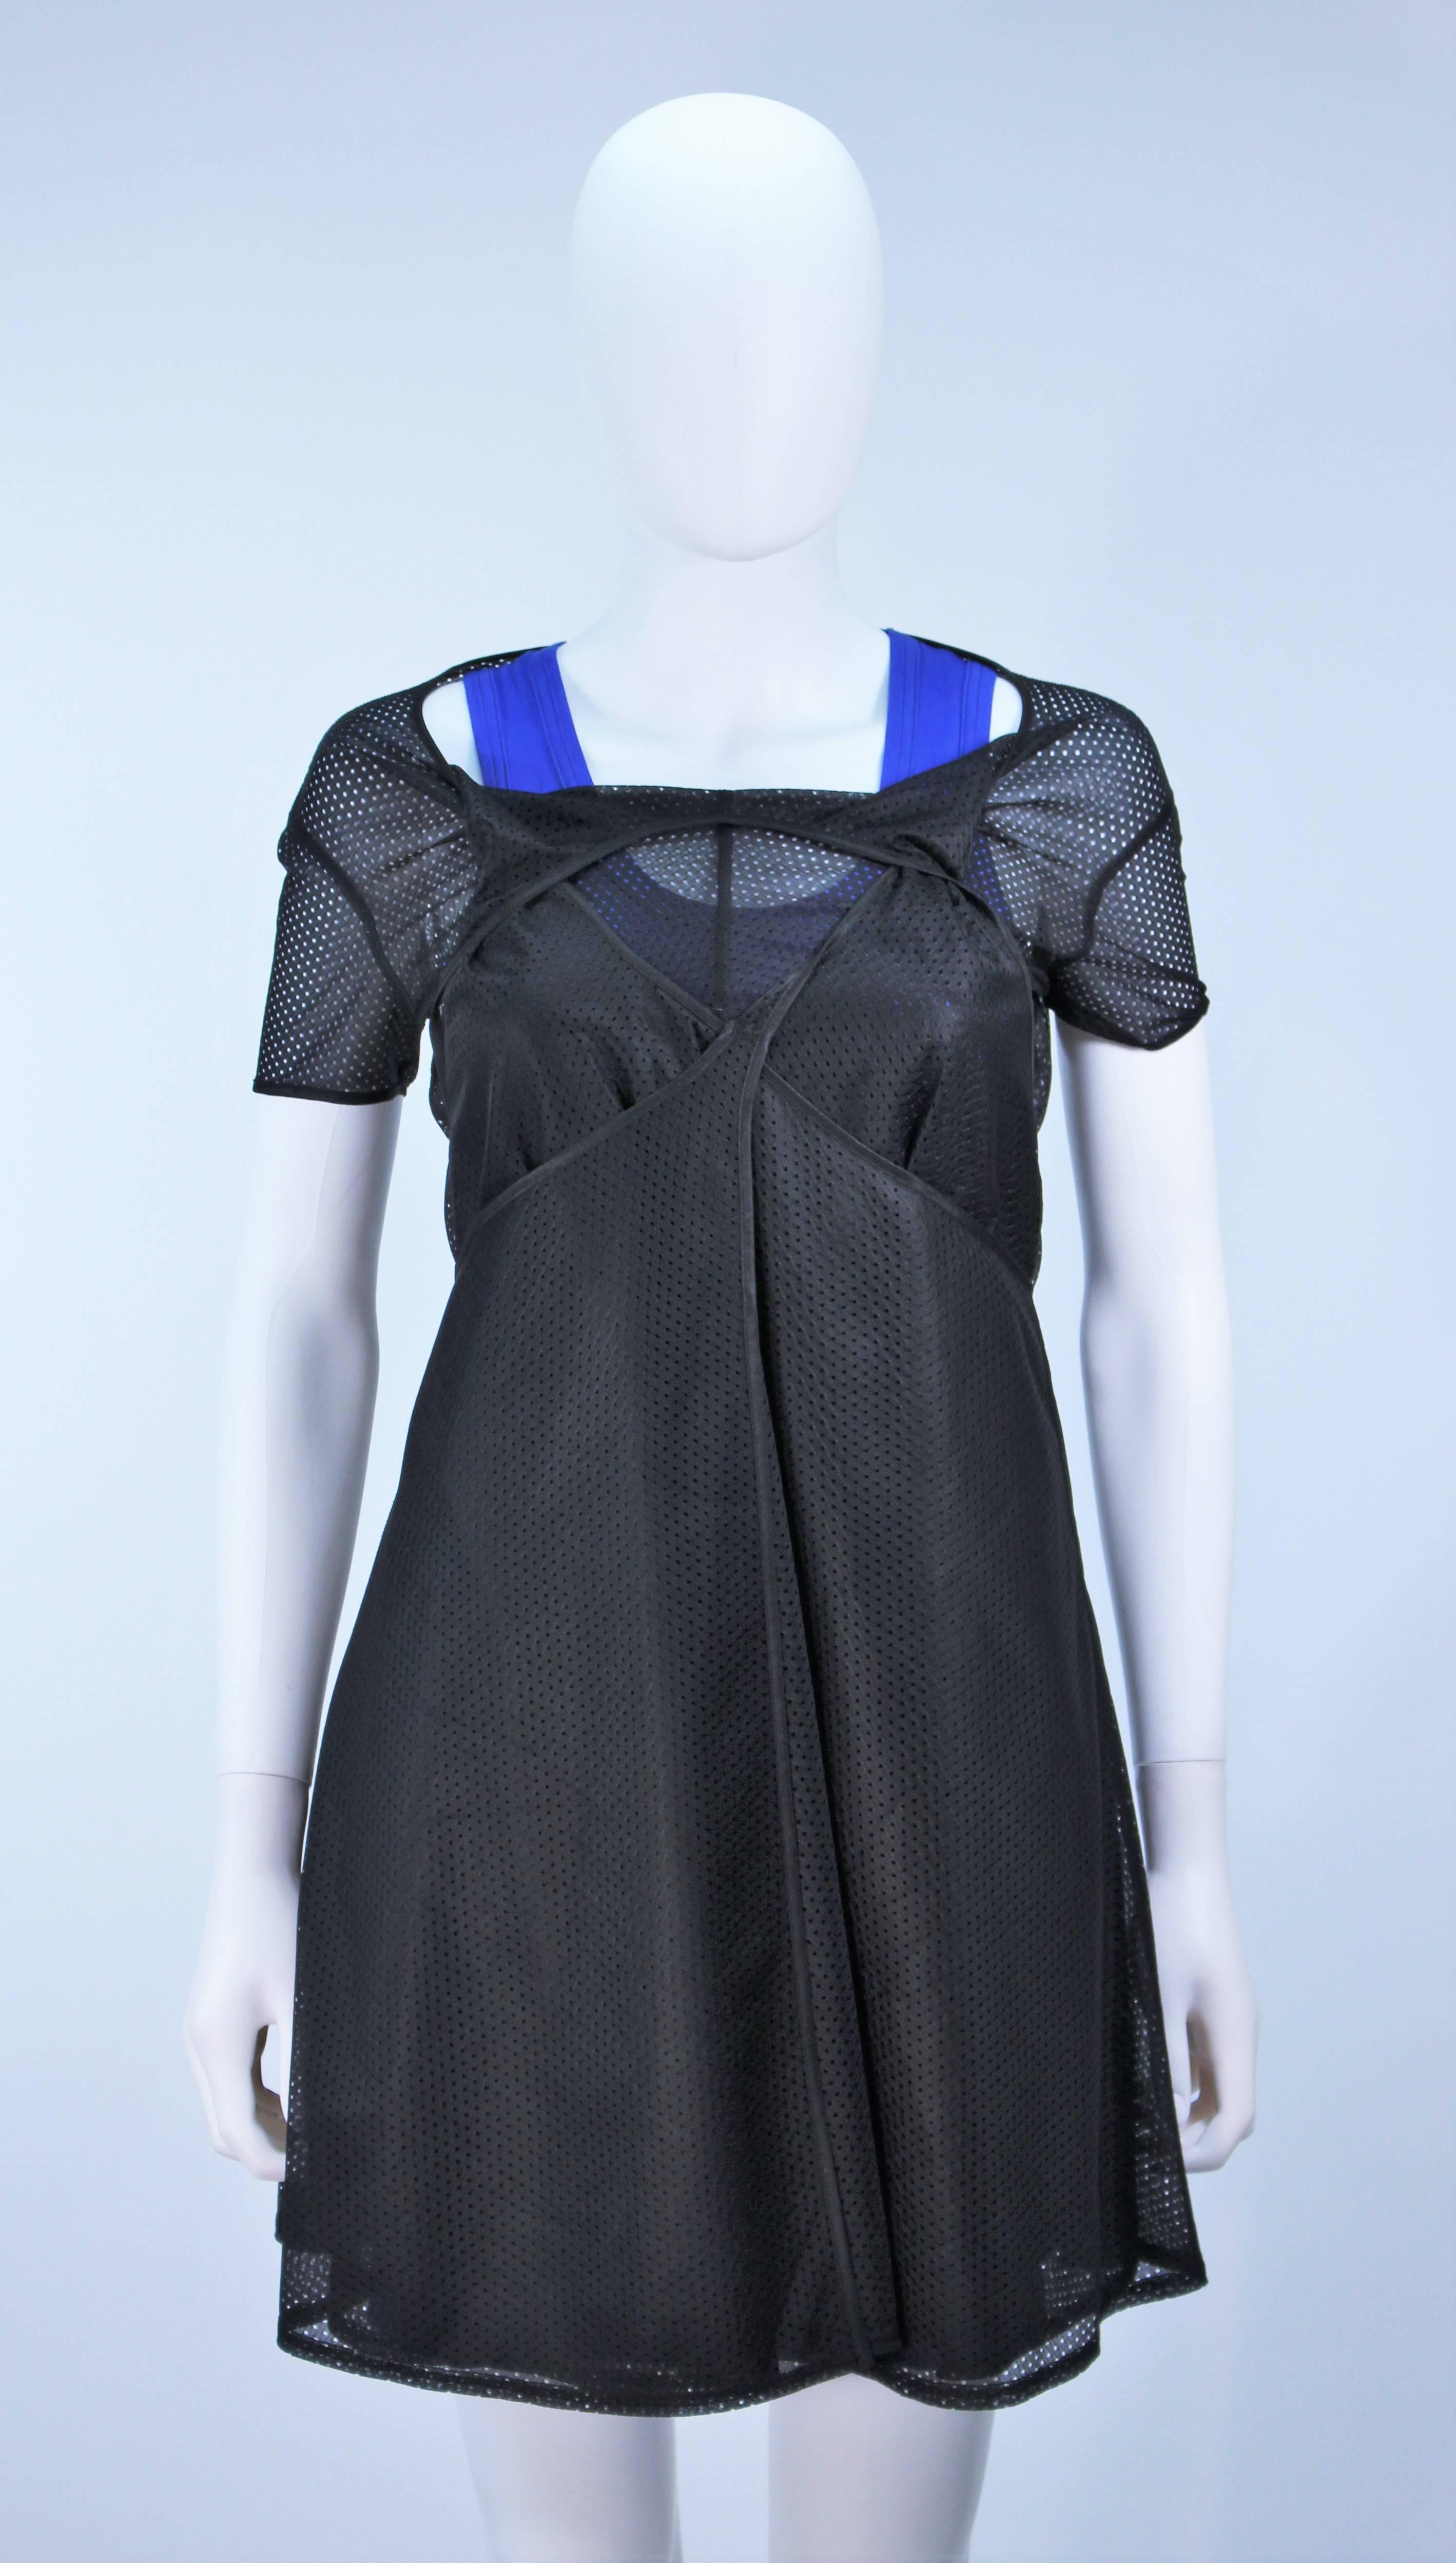  This Comme Des Garcons  ensemble is composed of an exterior draped mesh dress and an interior blue jersey dress. The exterior dress features a flared skirt and draped neck, the blue interior dress has a racer back style with stretch. In like new